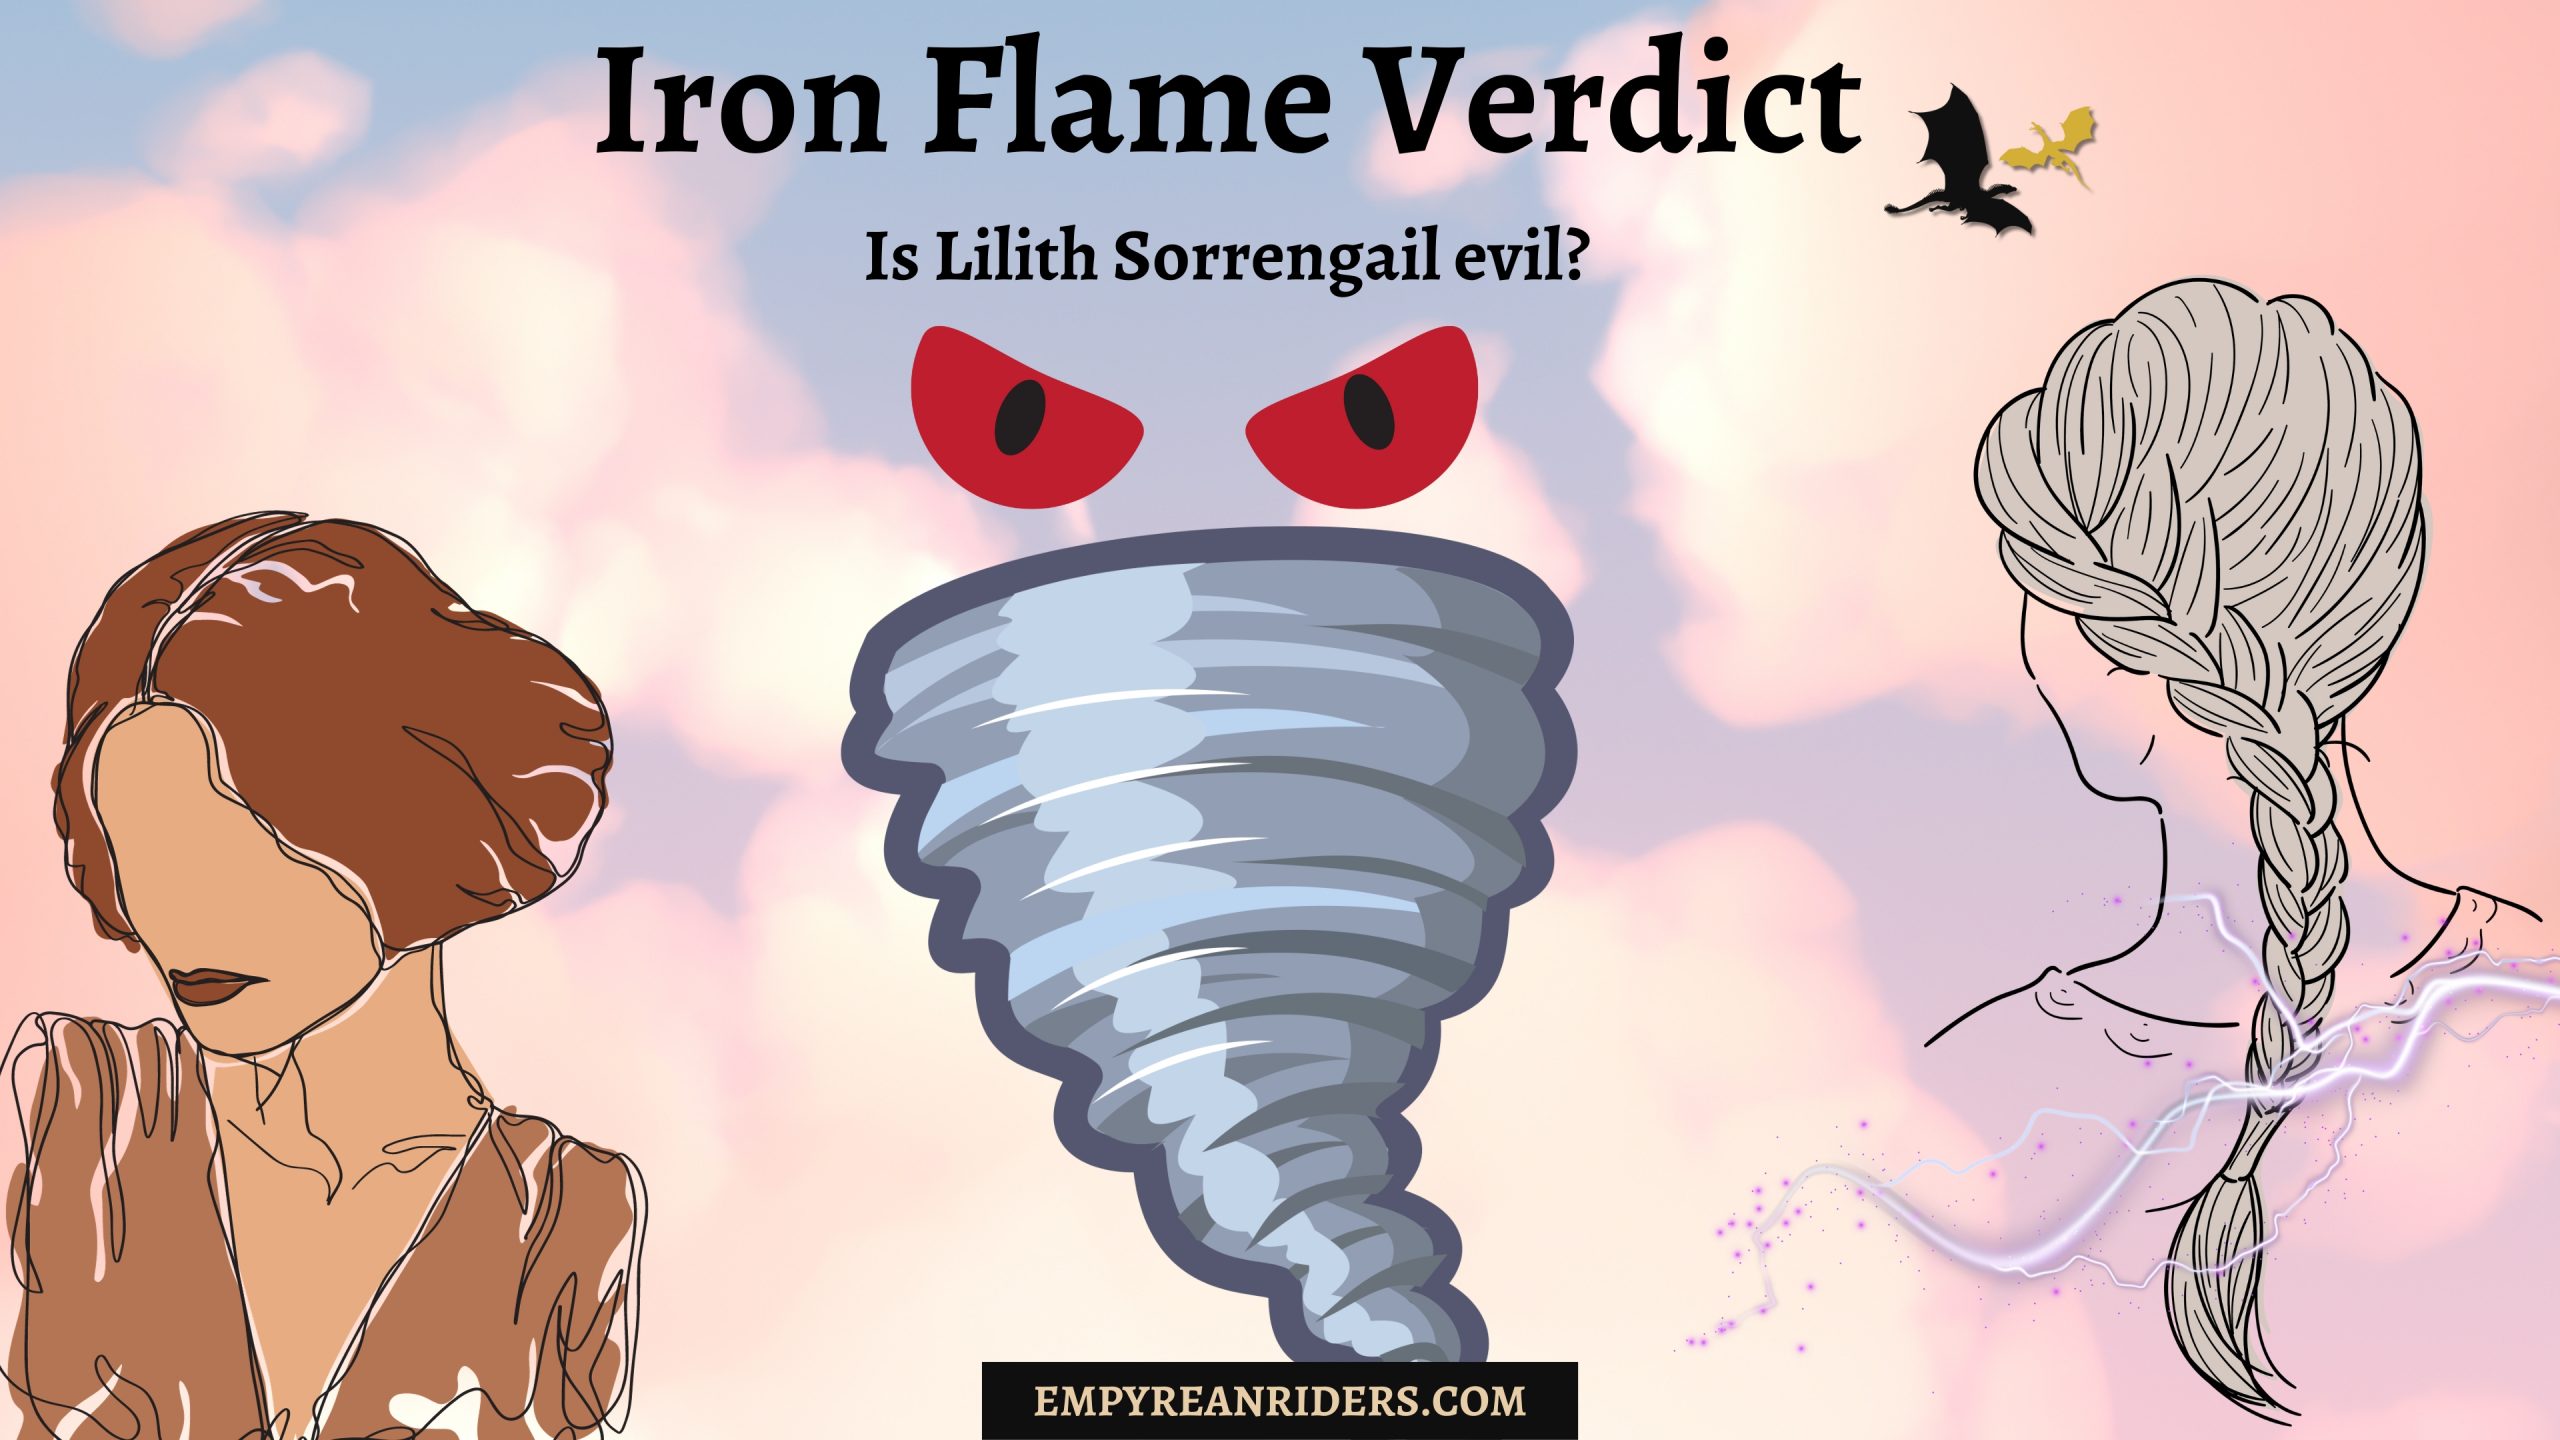 Iron Flame Verdict: Is Lilith Sorrengail evil or not?